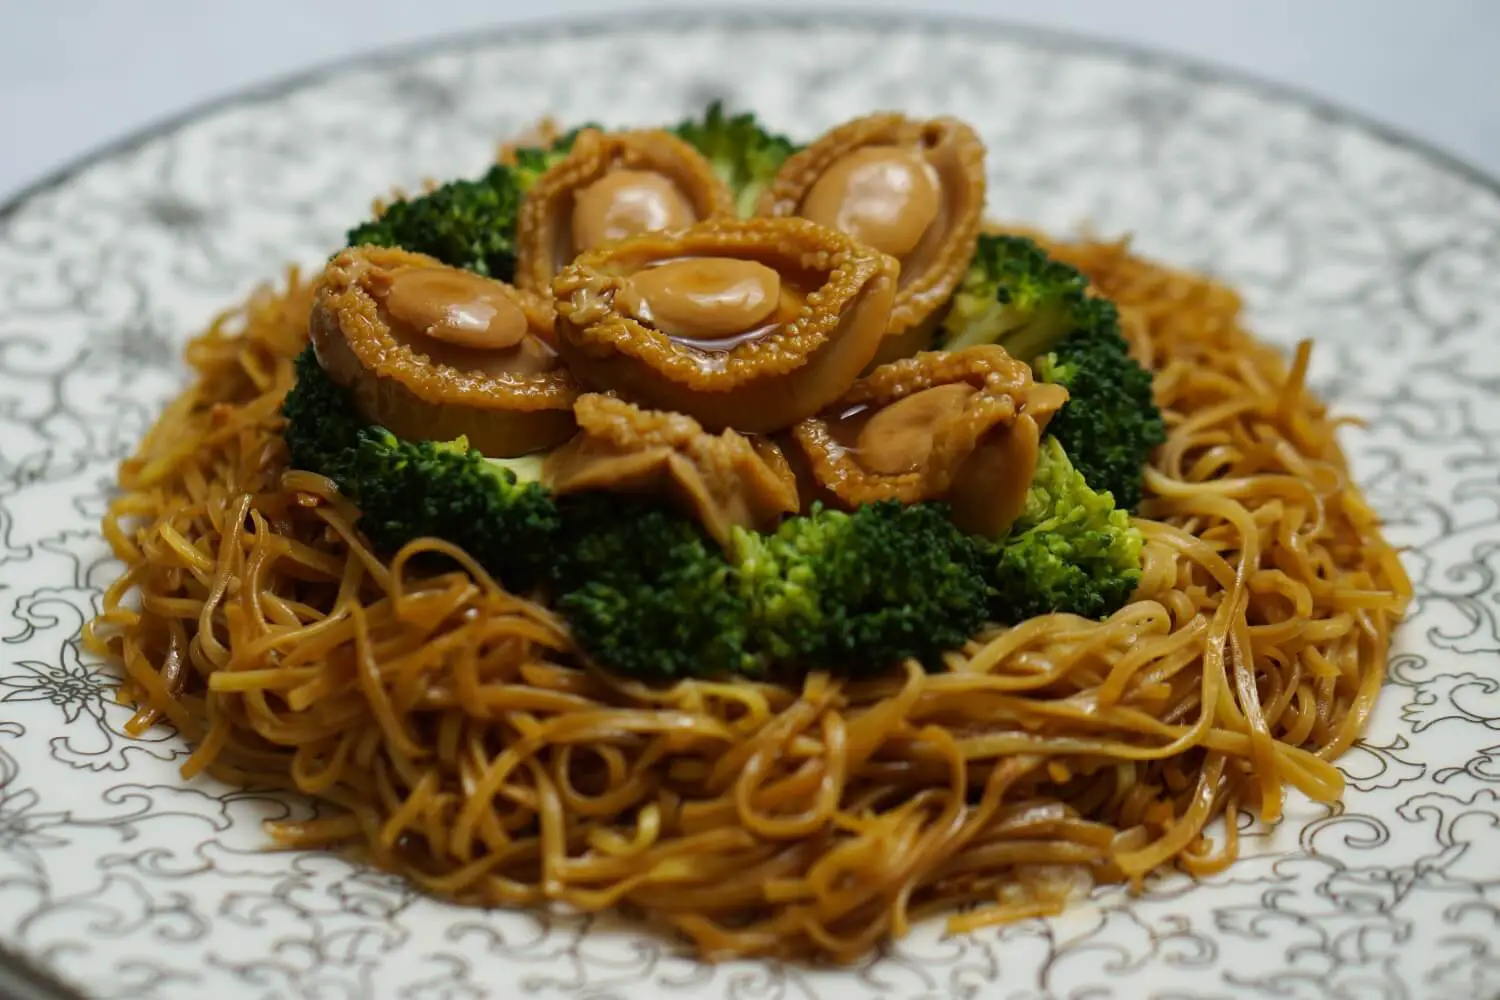 E-Fu Noodles with Braised Abalones and Broccoli 鲍鱼西兰花伊府面